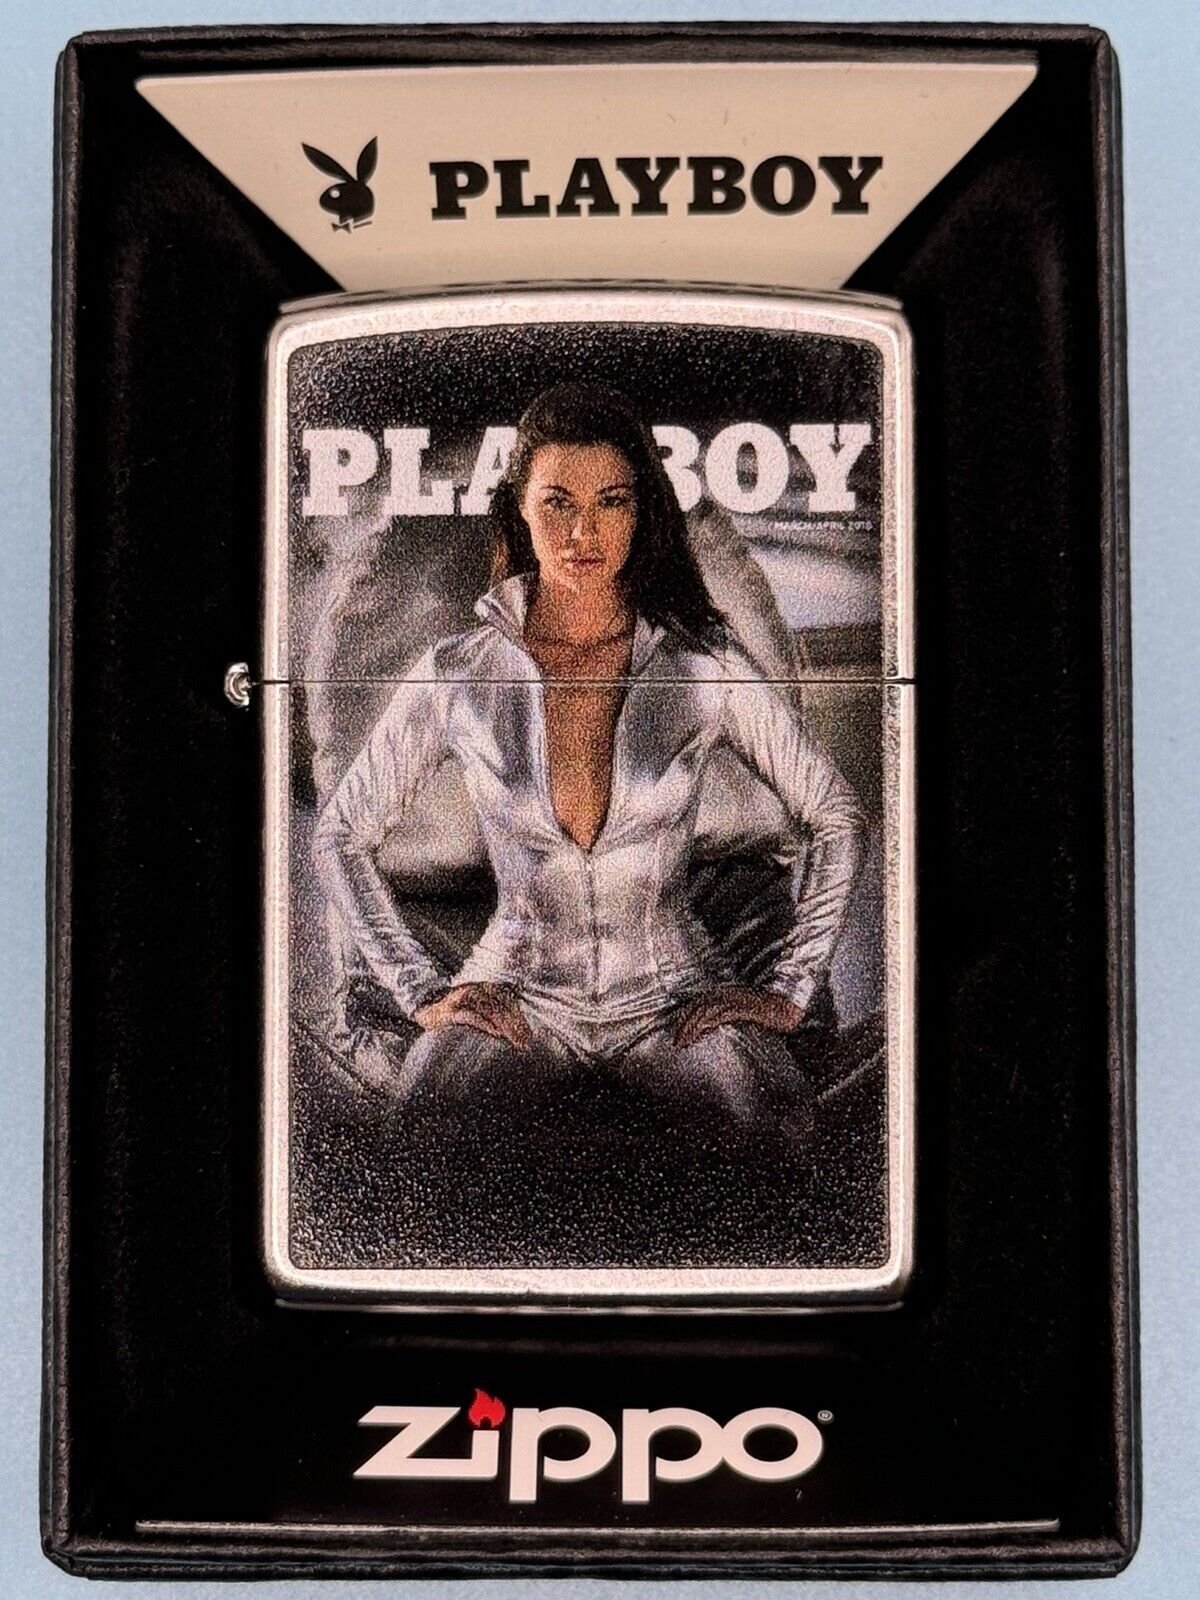 March 2018 Playboy Magazine Cover Zippo Lighter NEW In Box Rare Pinup